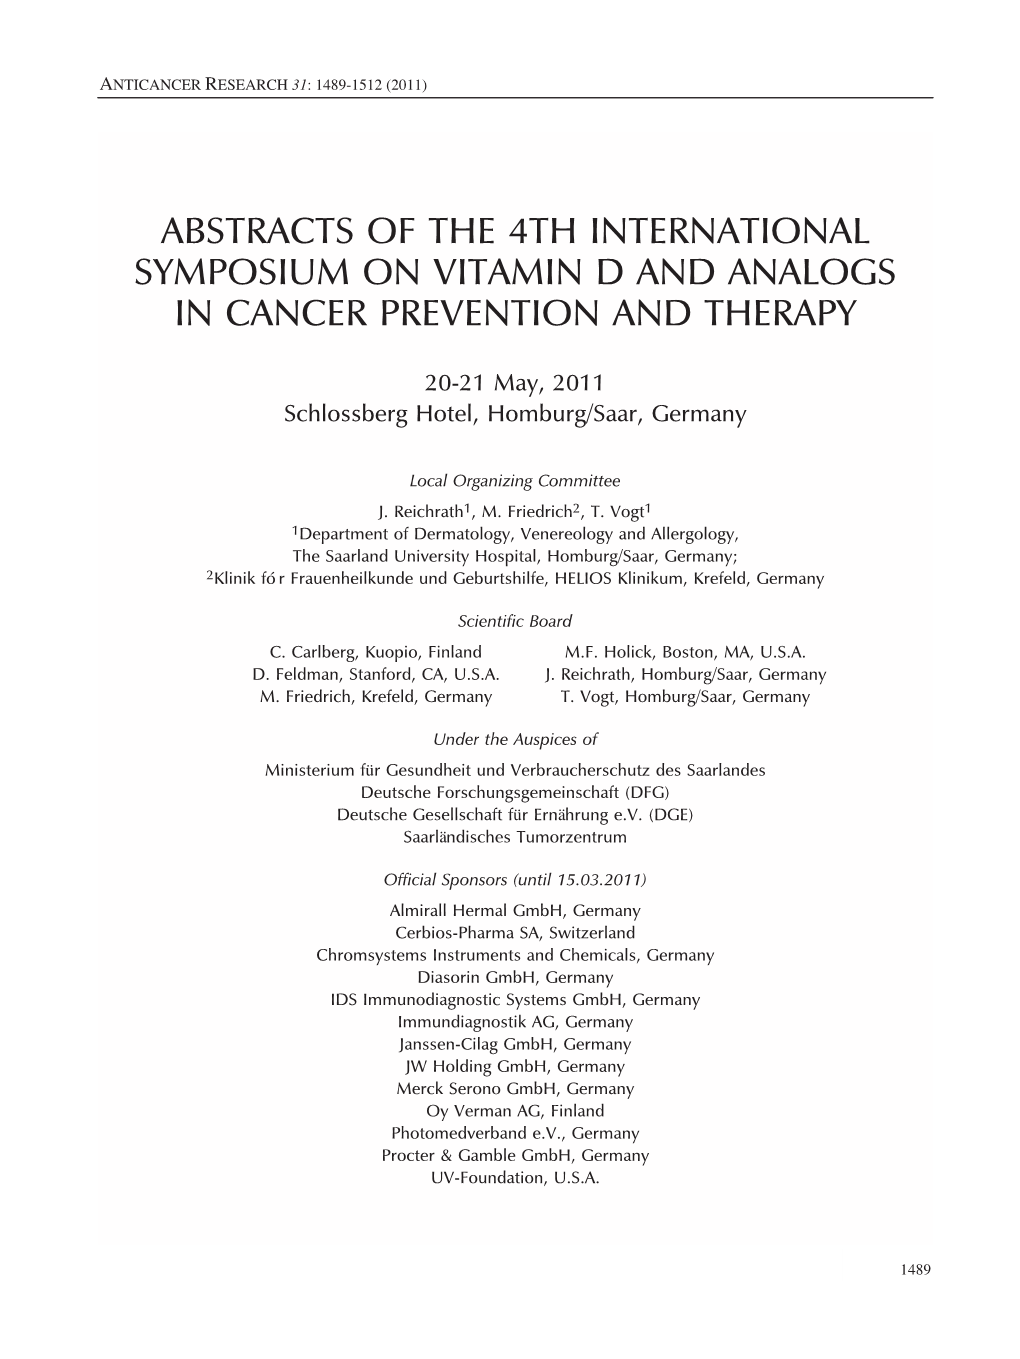 Abstracts of the 4Th International Symposium on Vitamin D and Analogs in Cancer Prevention and Therapy